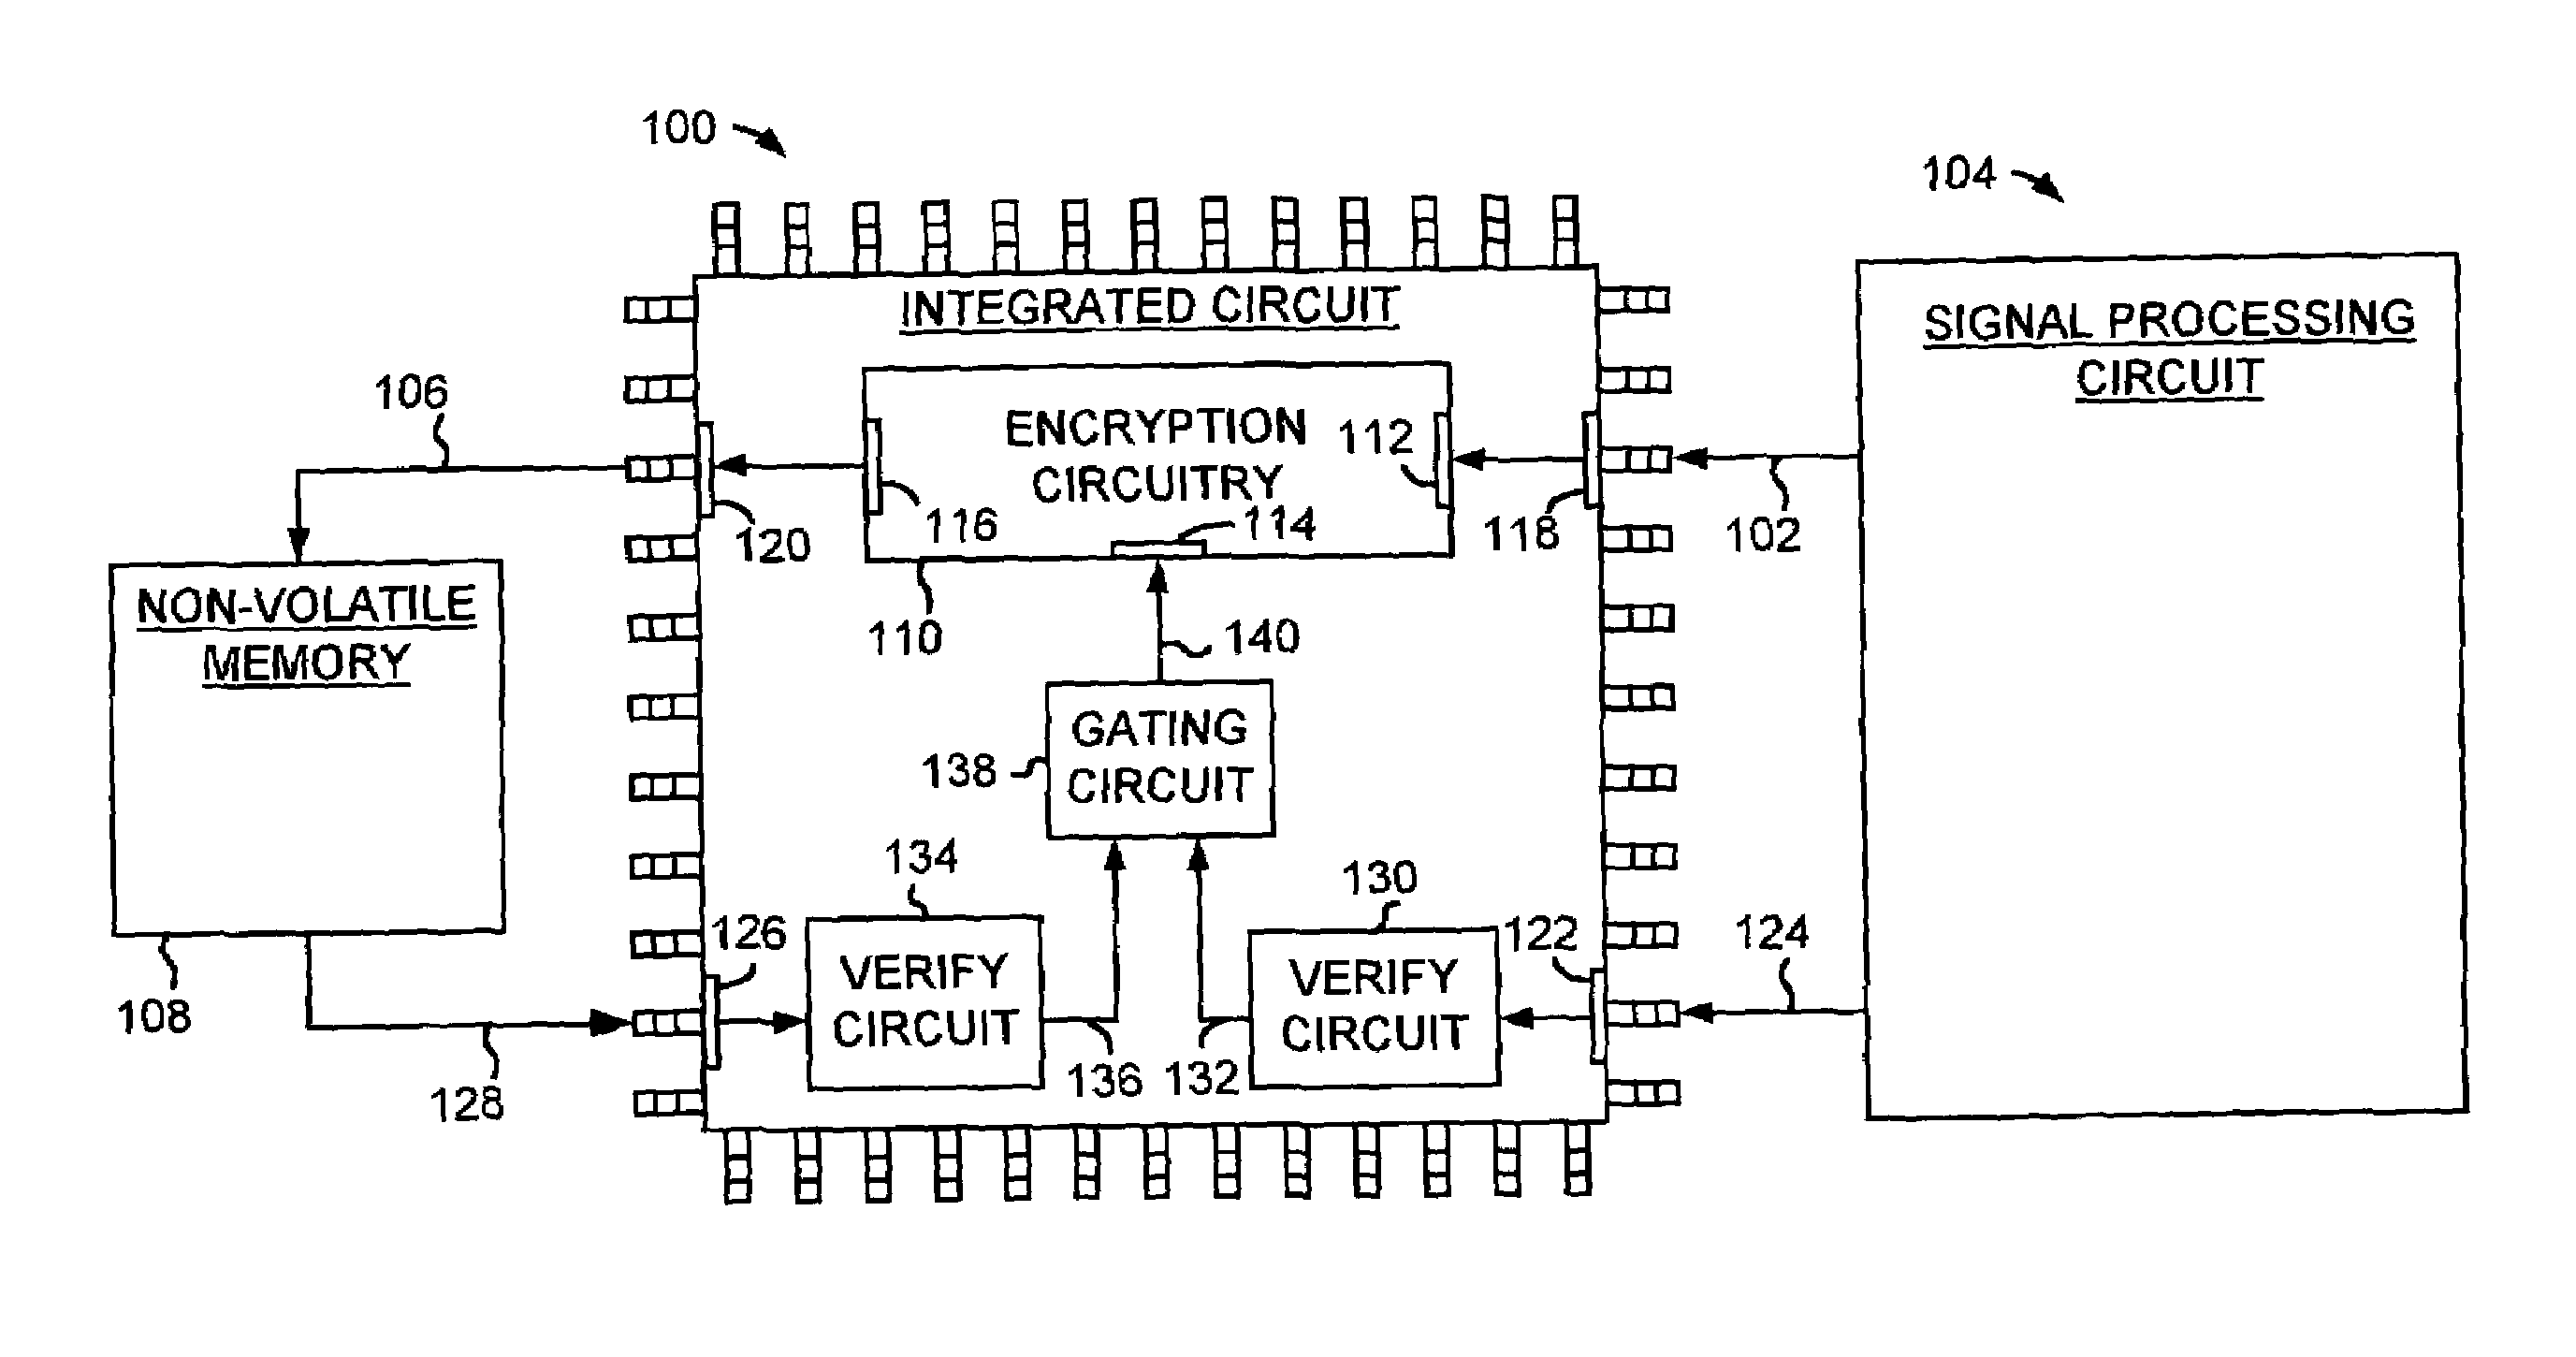 Integrated circuit comprising encryption circuitry selectively enabled by verifying a device